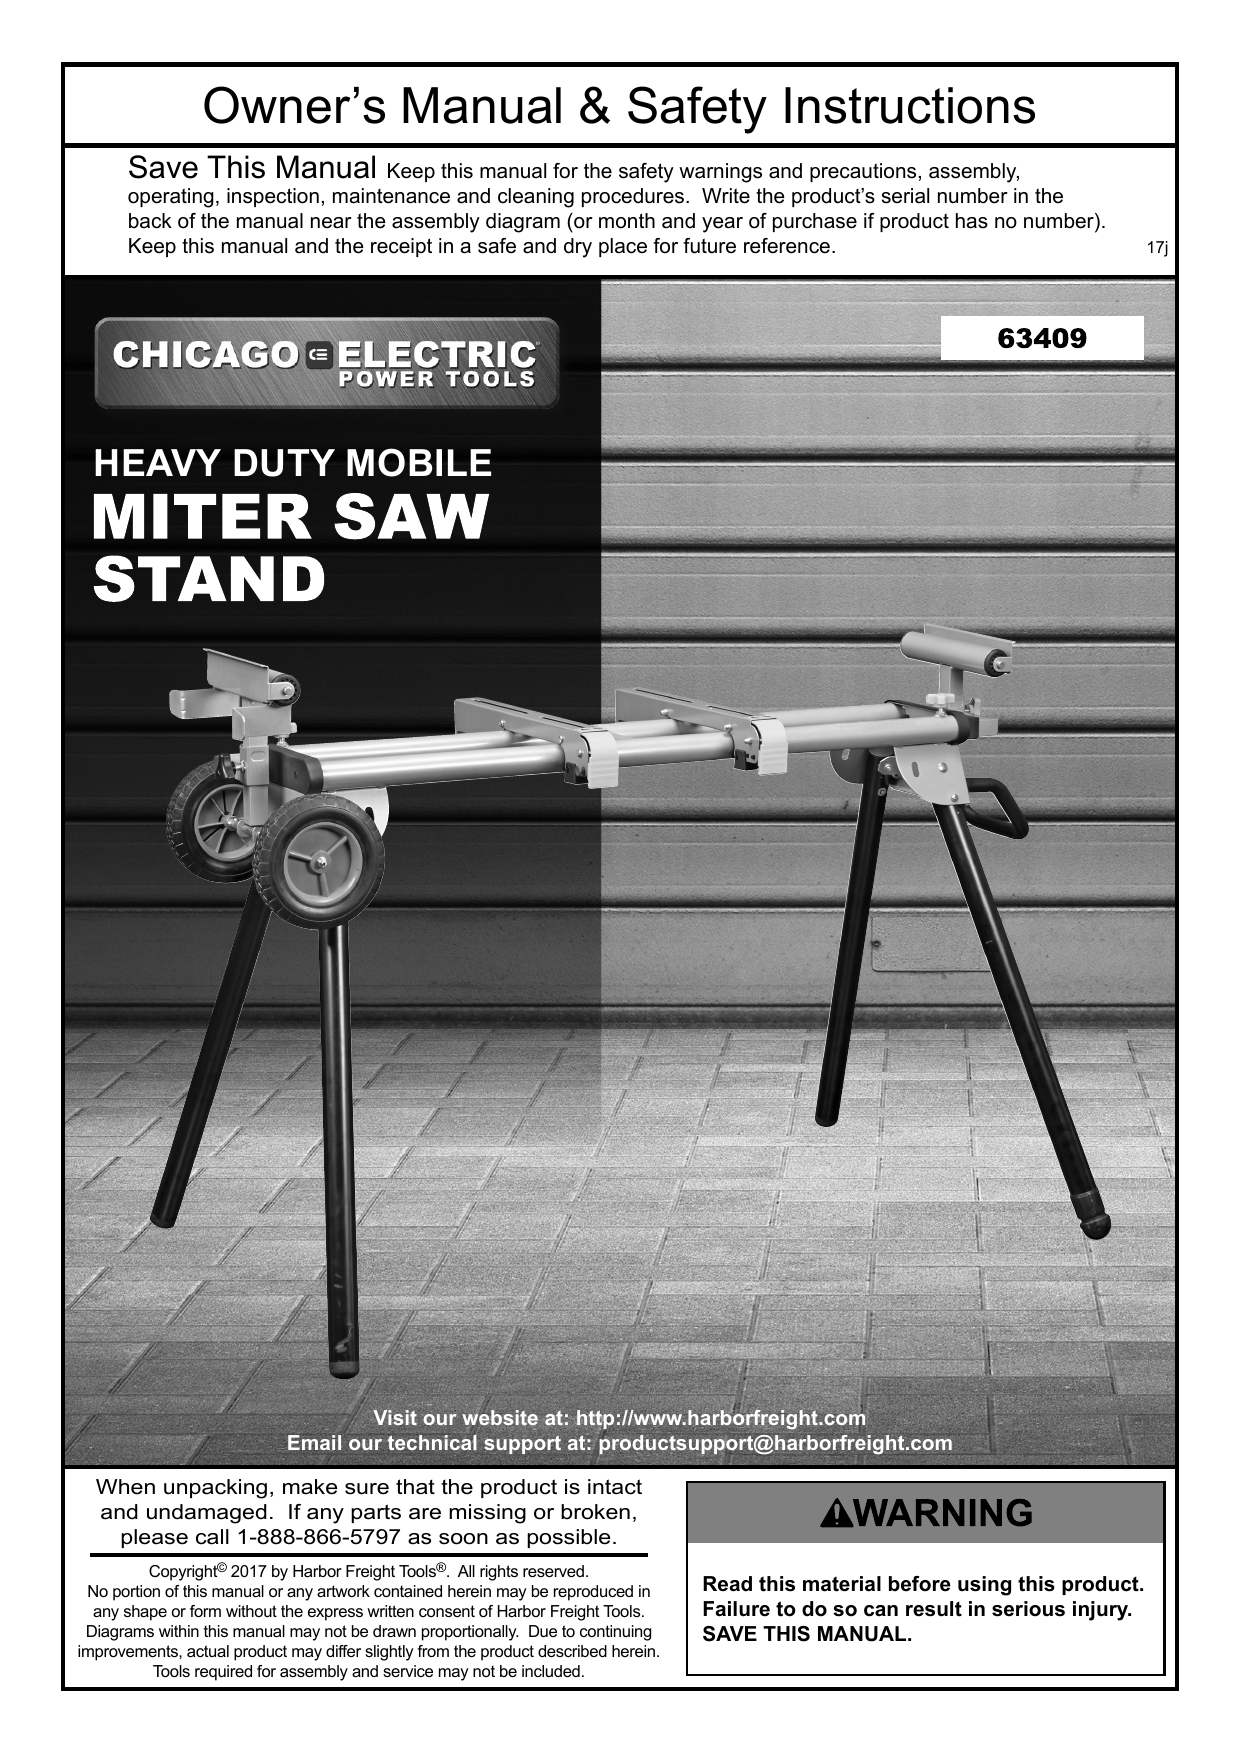 Heavy Duty Mobile Miter Saw Stand for sale online 400 Lbs Chicago Electric Power Tools 62750 16ft 